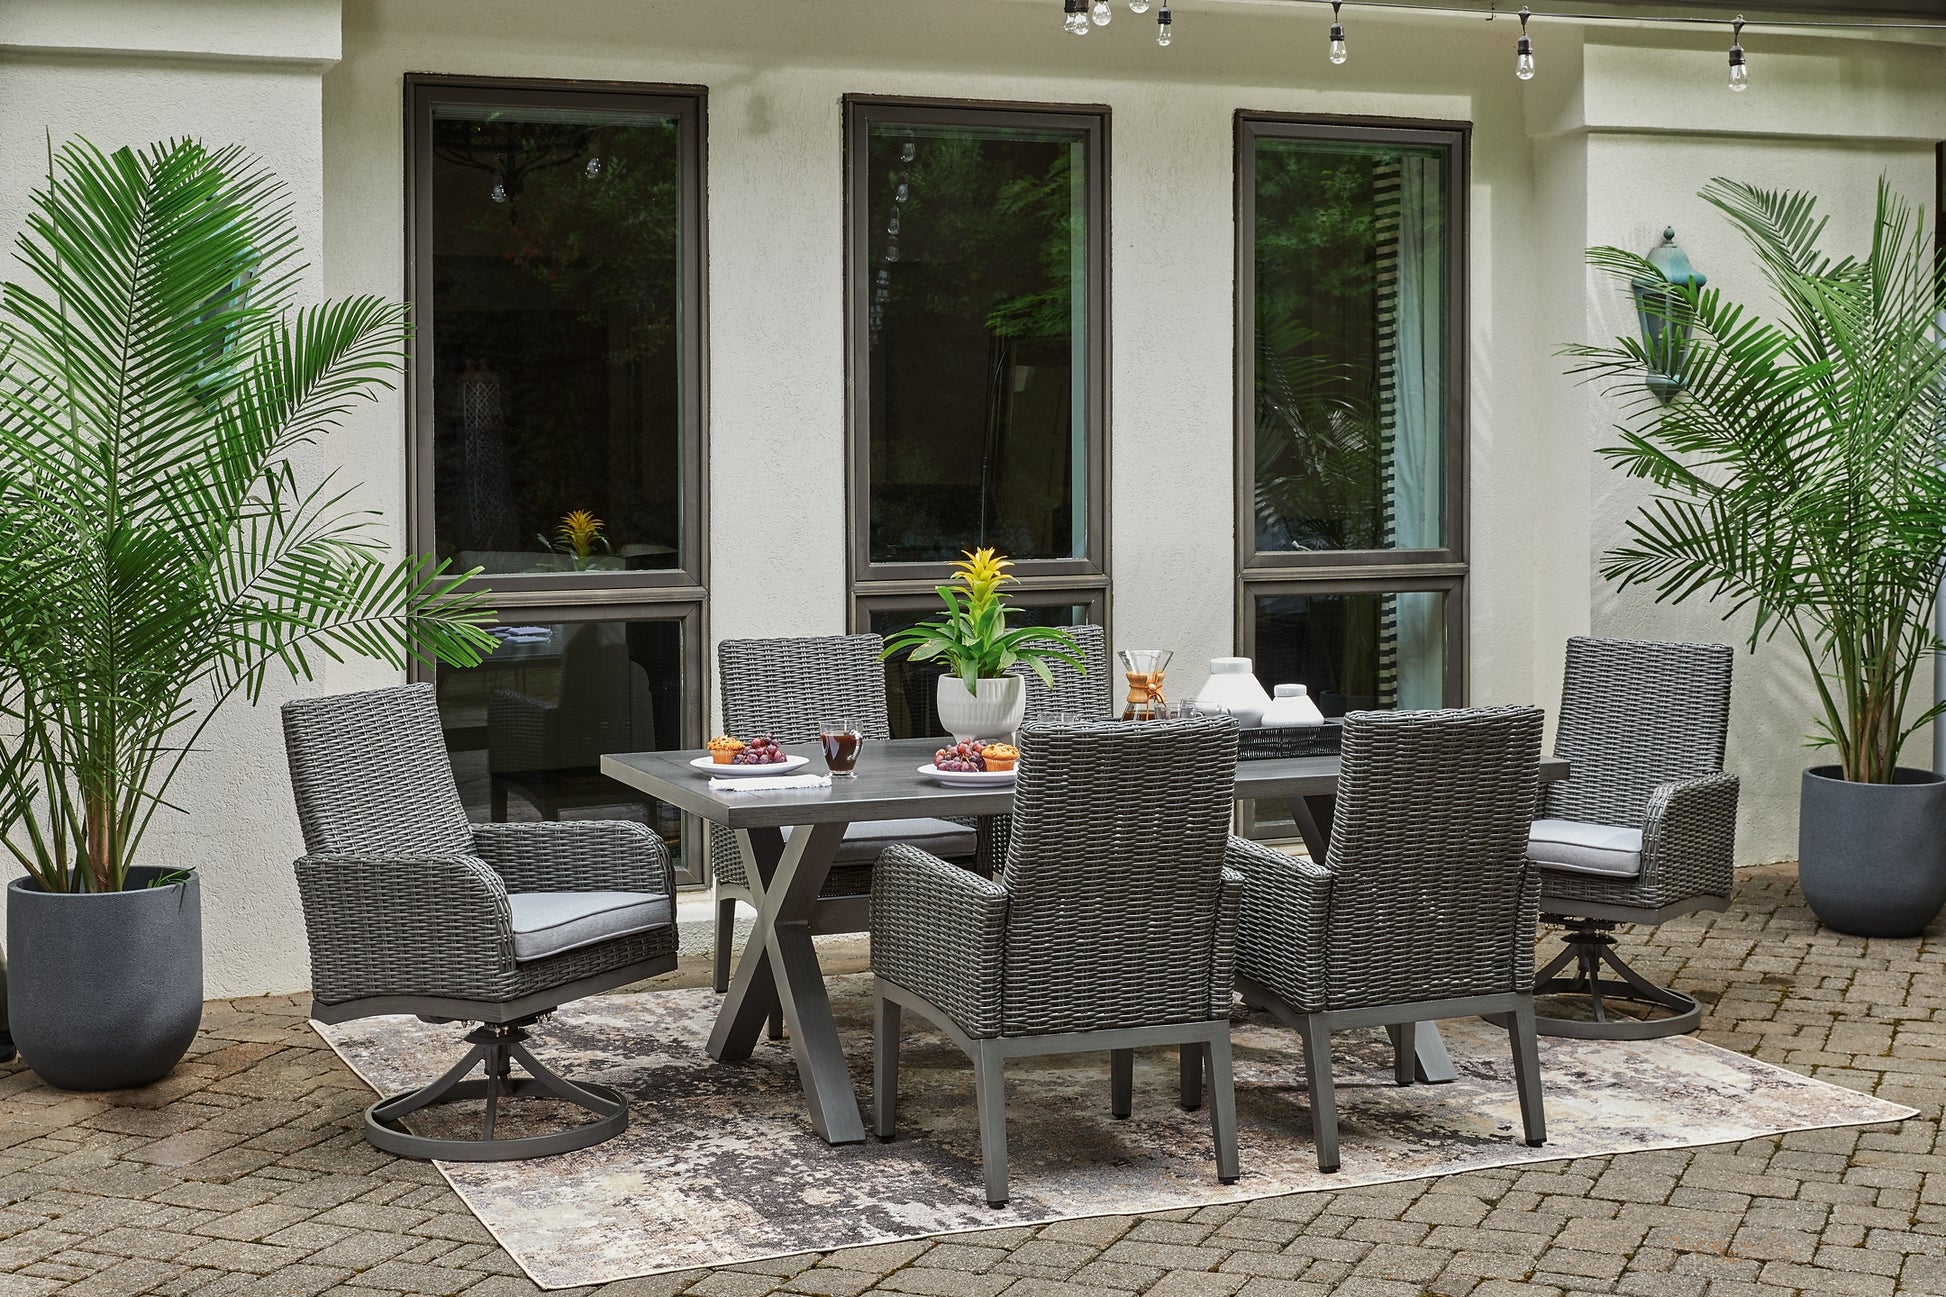 Elite Park Outdoor Dining Table and 6 Chairs Wilson Furniture (OH)  in Bridgeport, Ohio. Serving Bridgeport, Yorkville, Bellaire, & Avondale